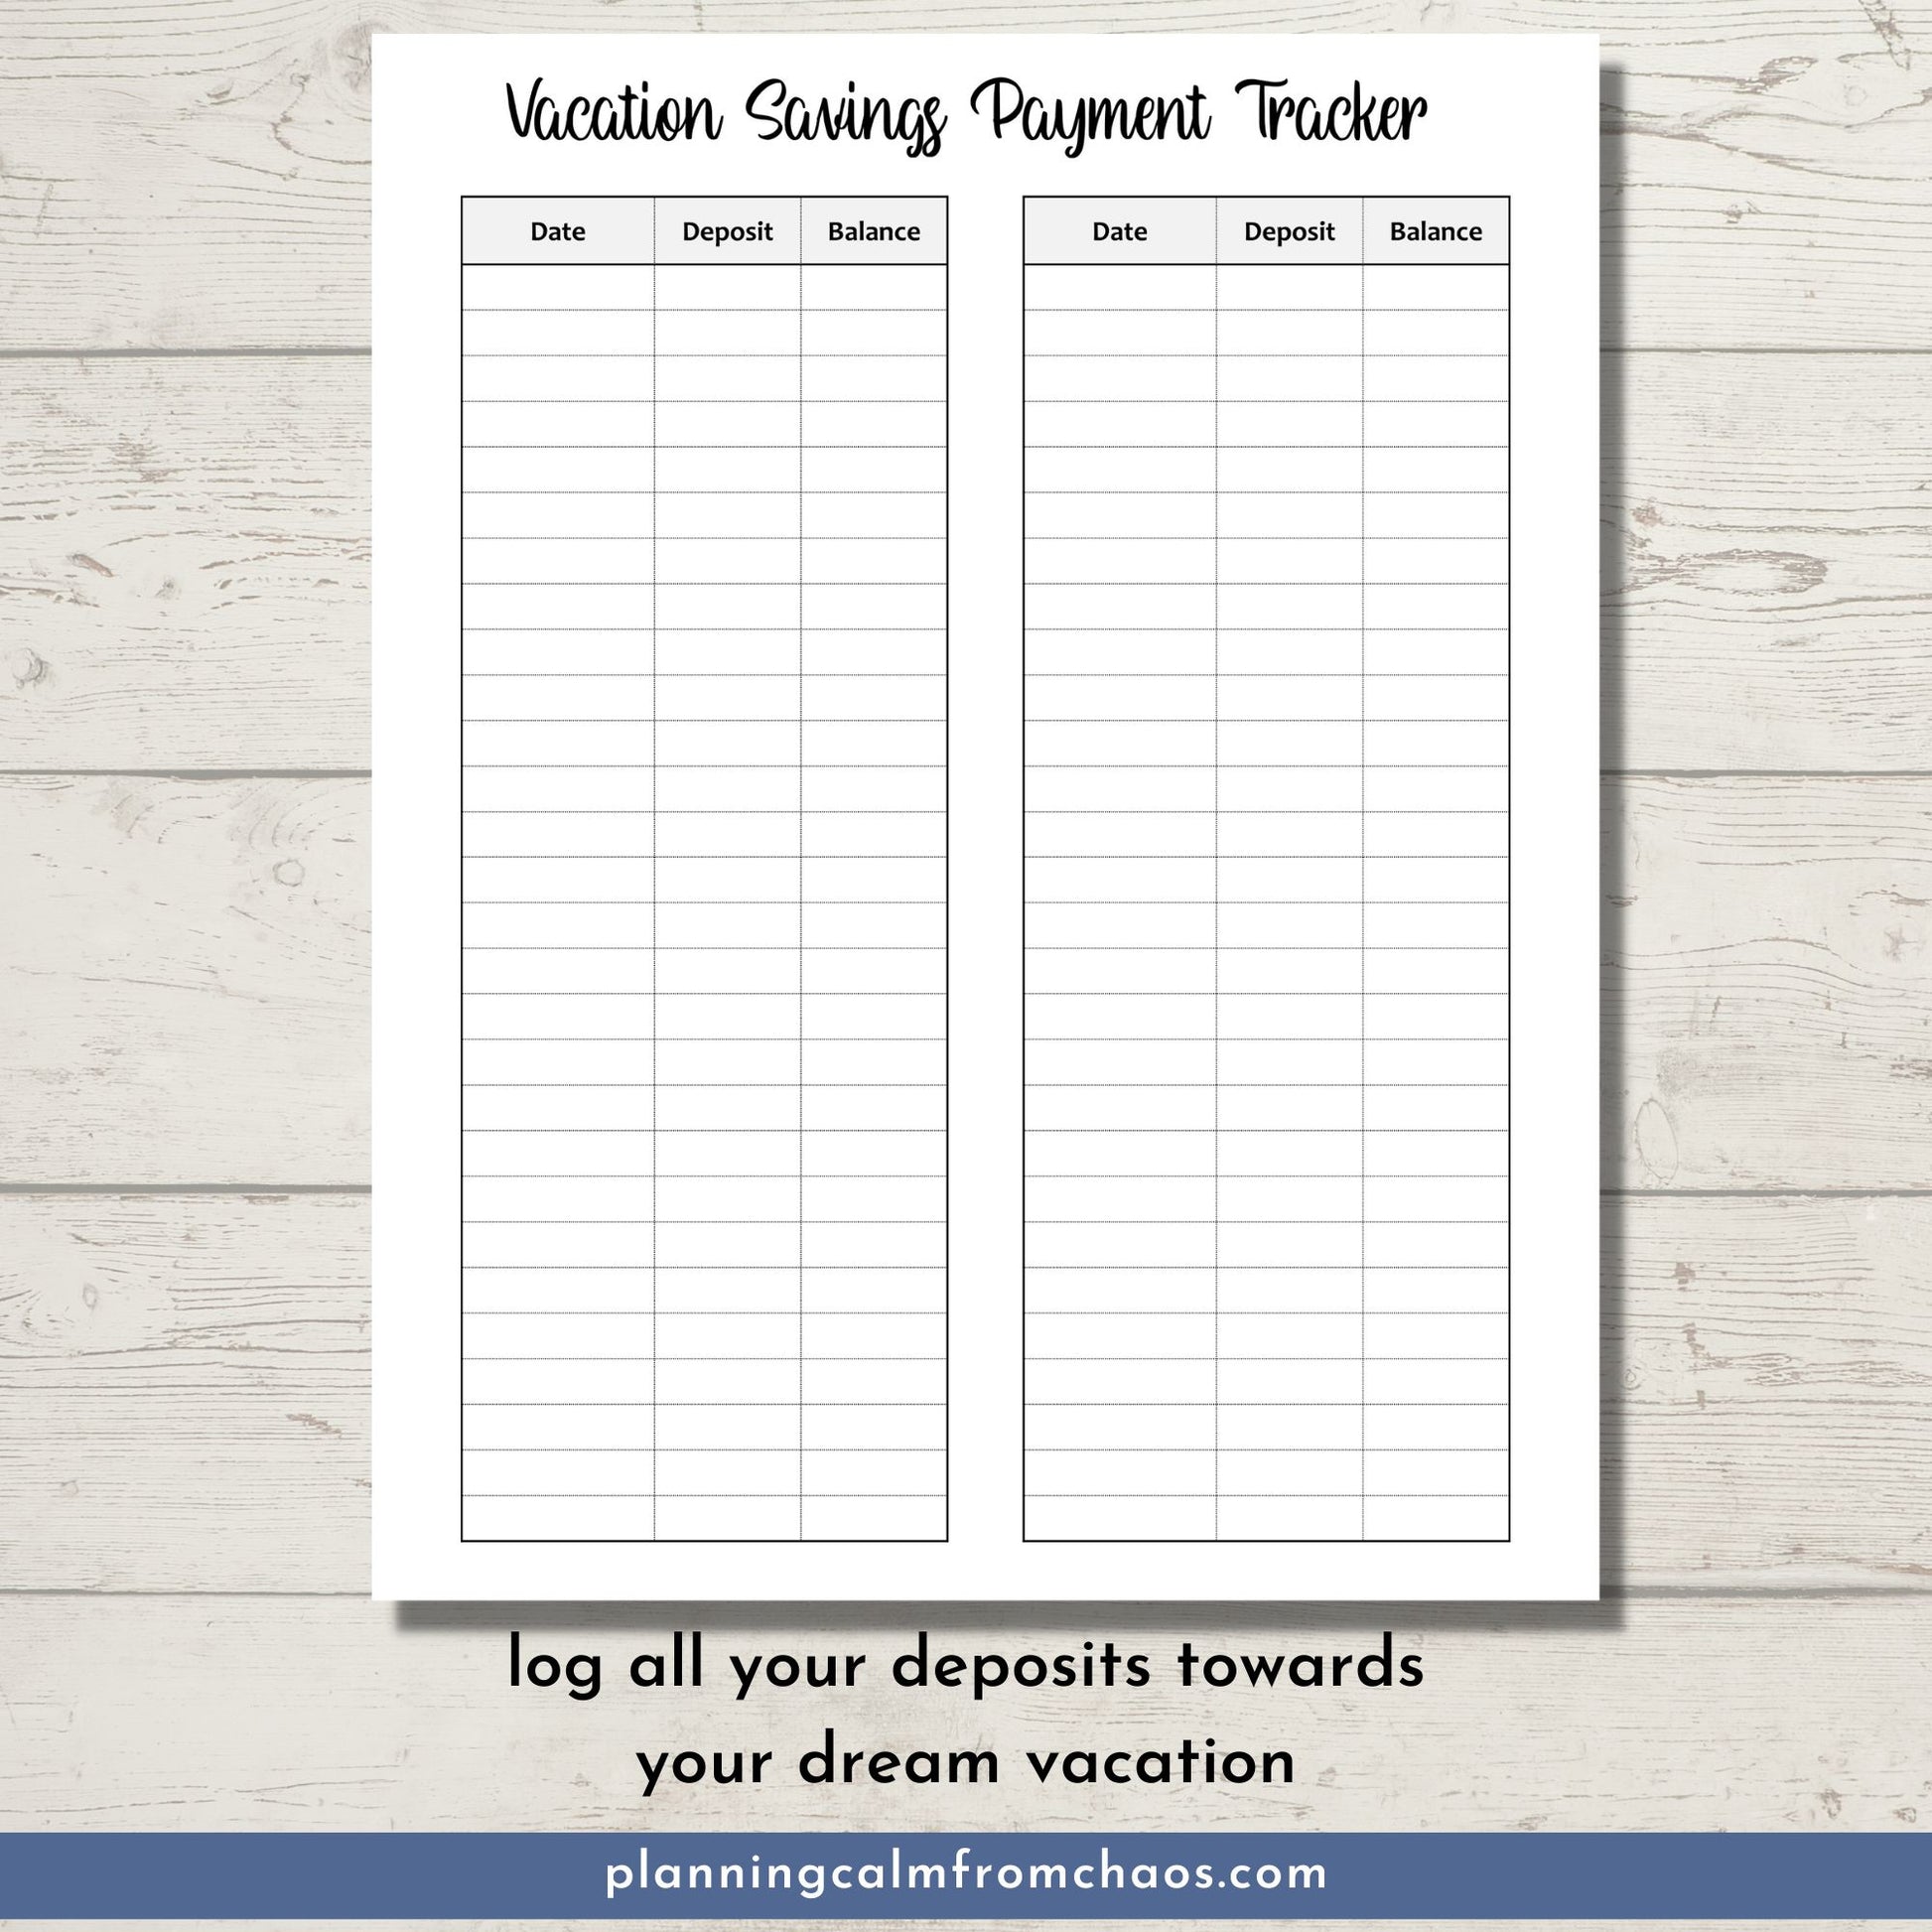 vacation savings payment tracker